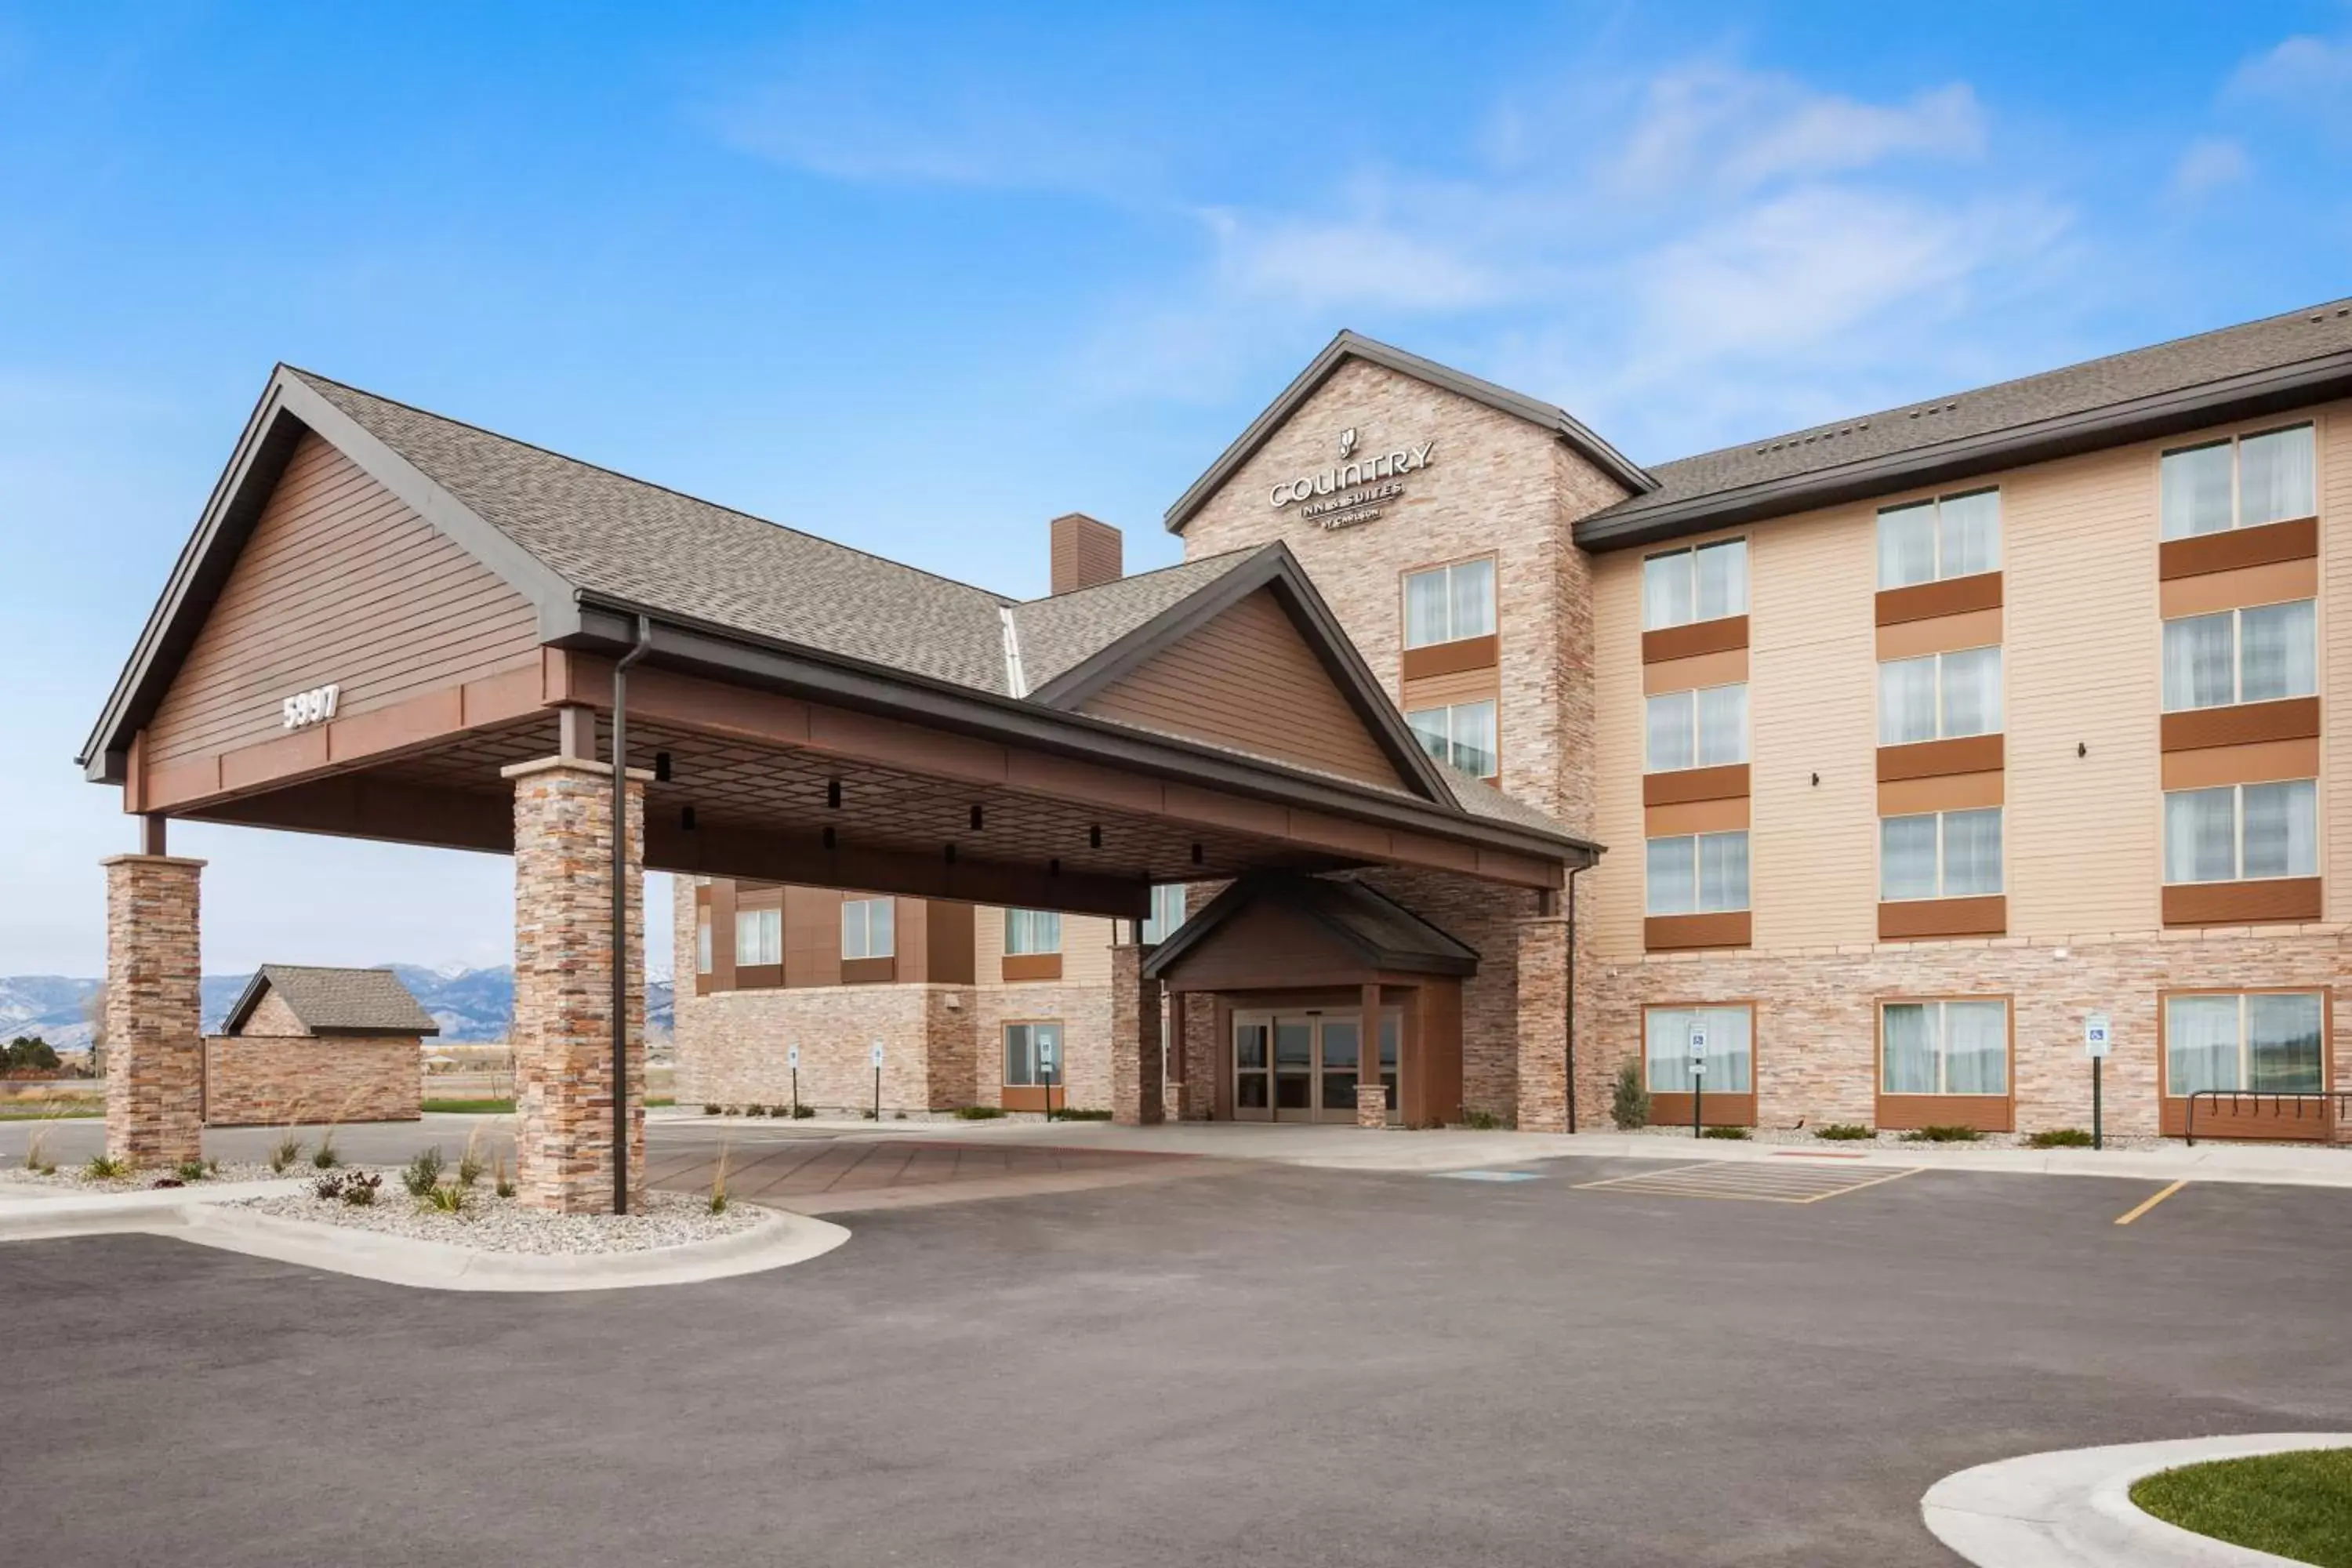 Facade/entrance, Property Building in Country Inn & Suites by Radisson, Bozeman, MT